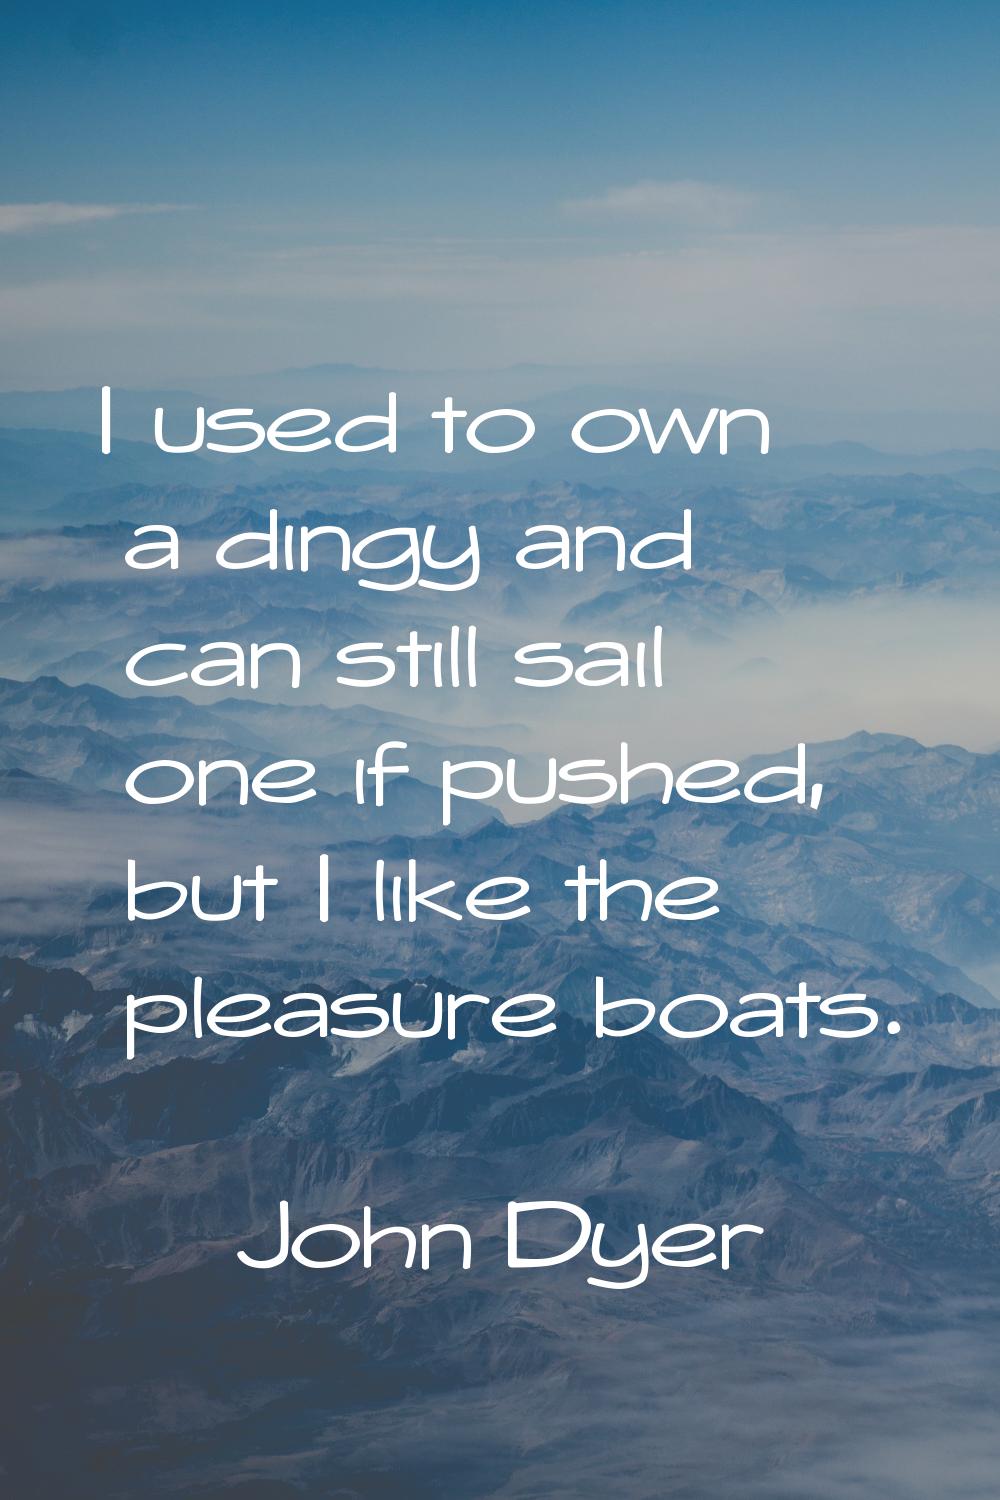 I used to own a dingy and can still sail one if pushed, but I like the pleasure boats.